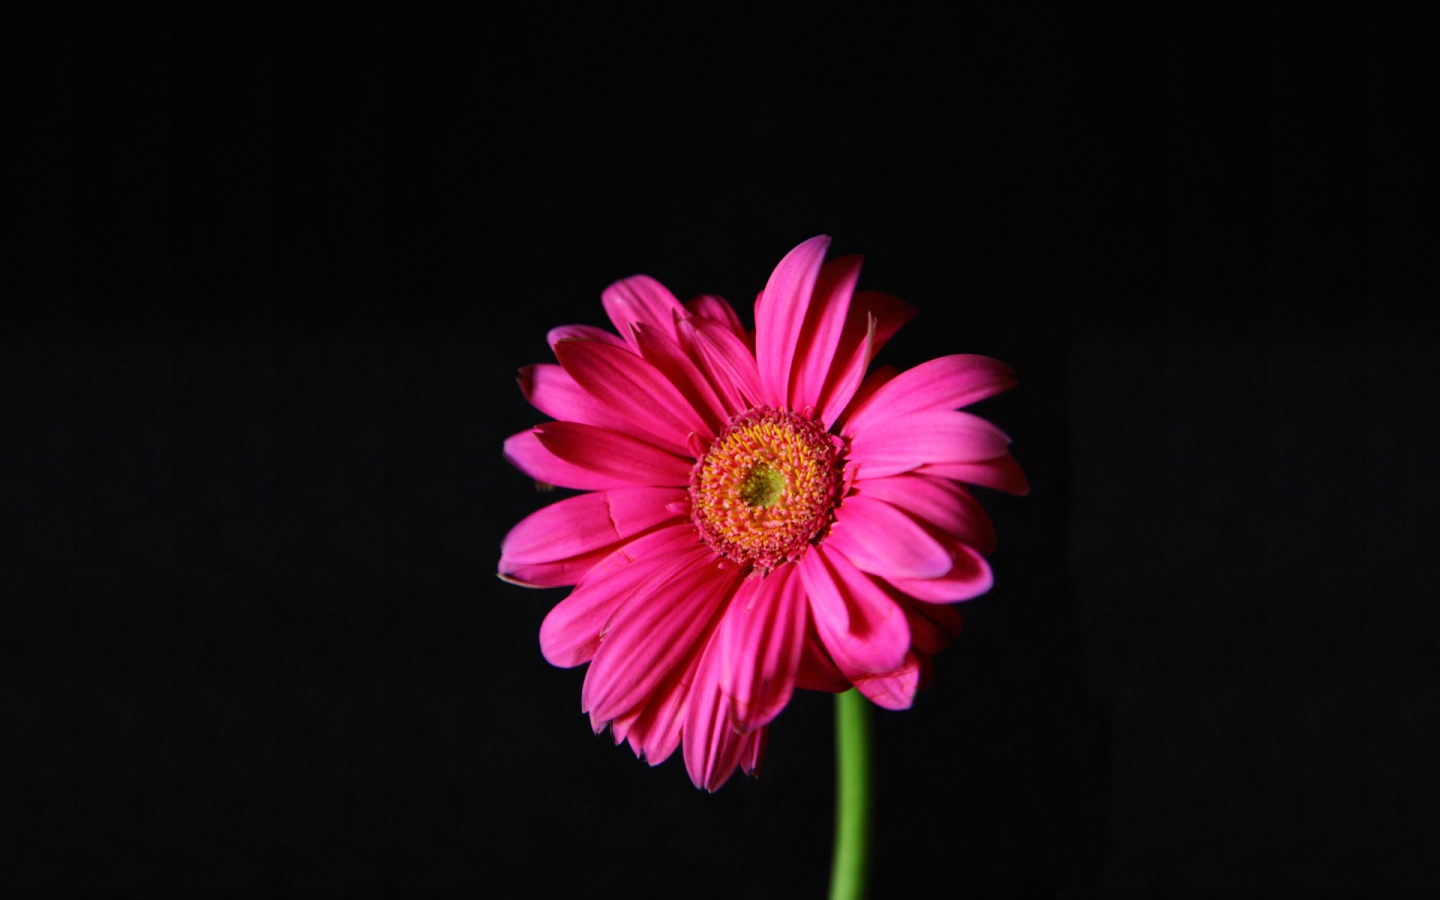 Hot Pink Gerber Daisy 1440x900 wallpaper download page 195843